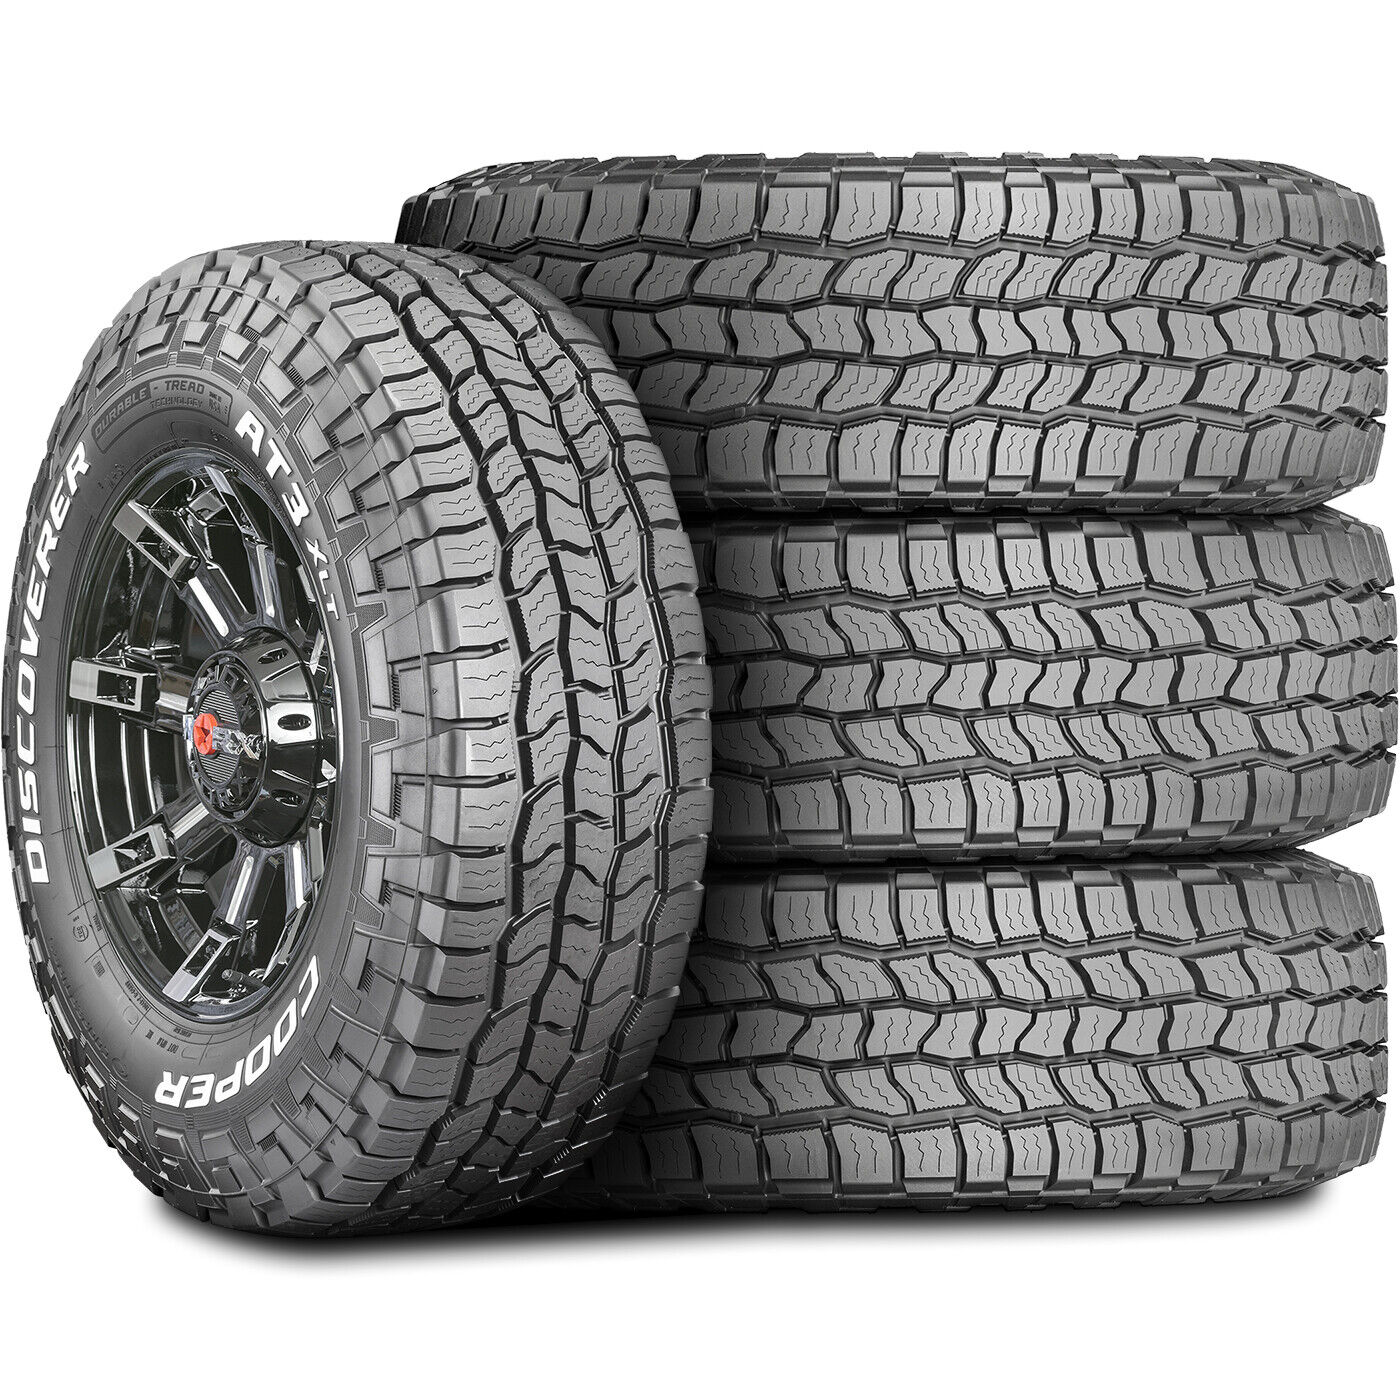 4 Tires Cooper Discoverer AT3 XLT LT 295/75R16 Load E 10 Ply A/T All Terrain